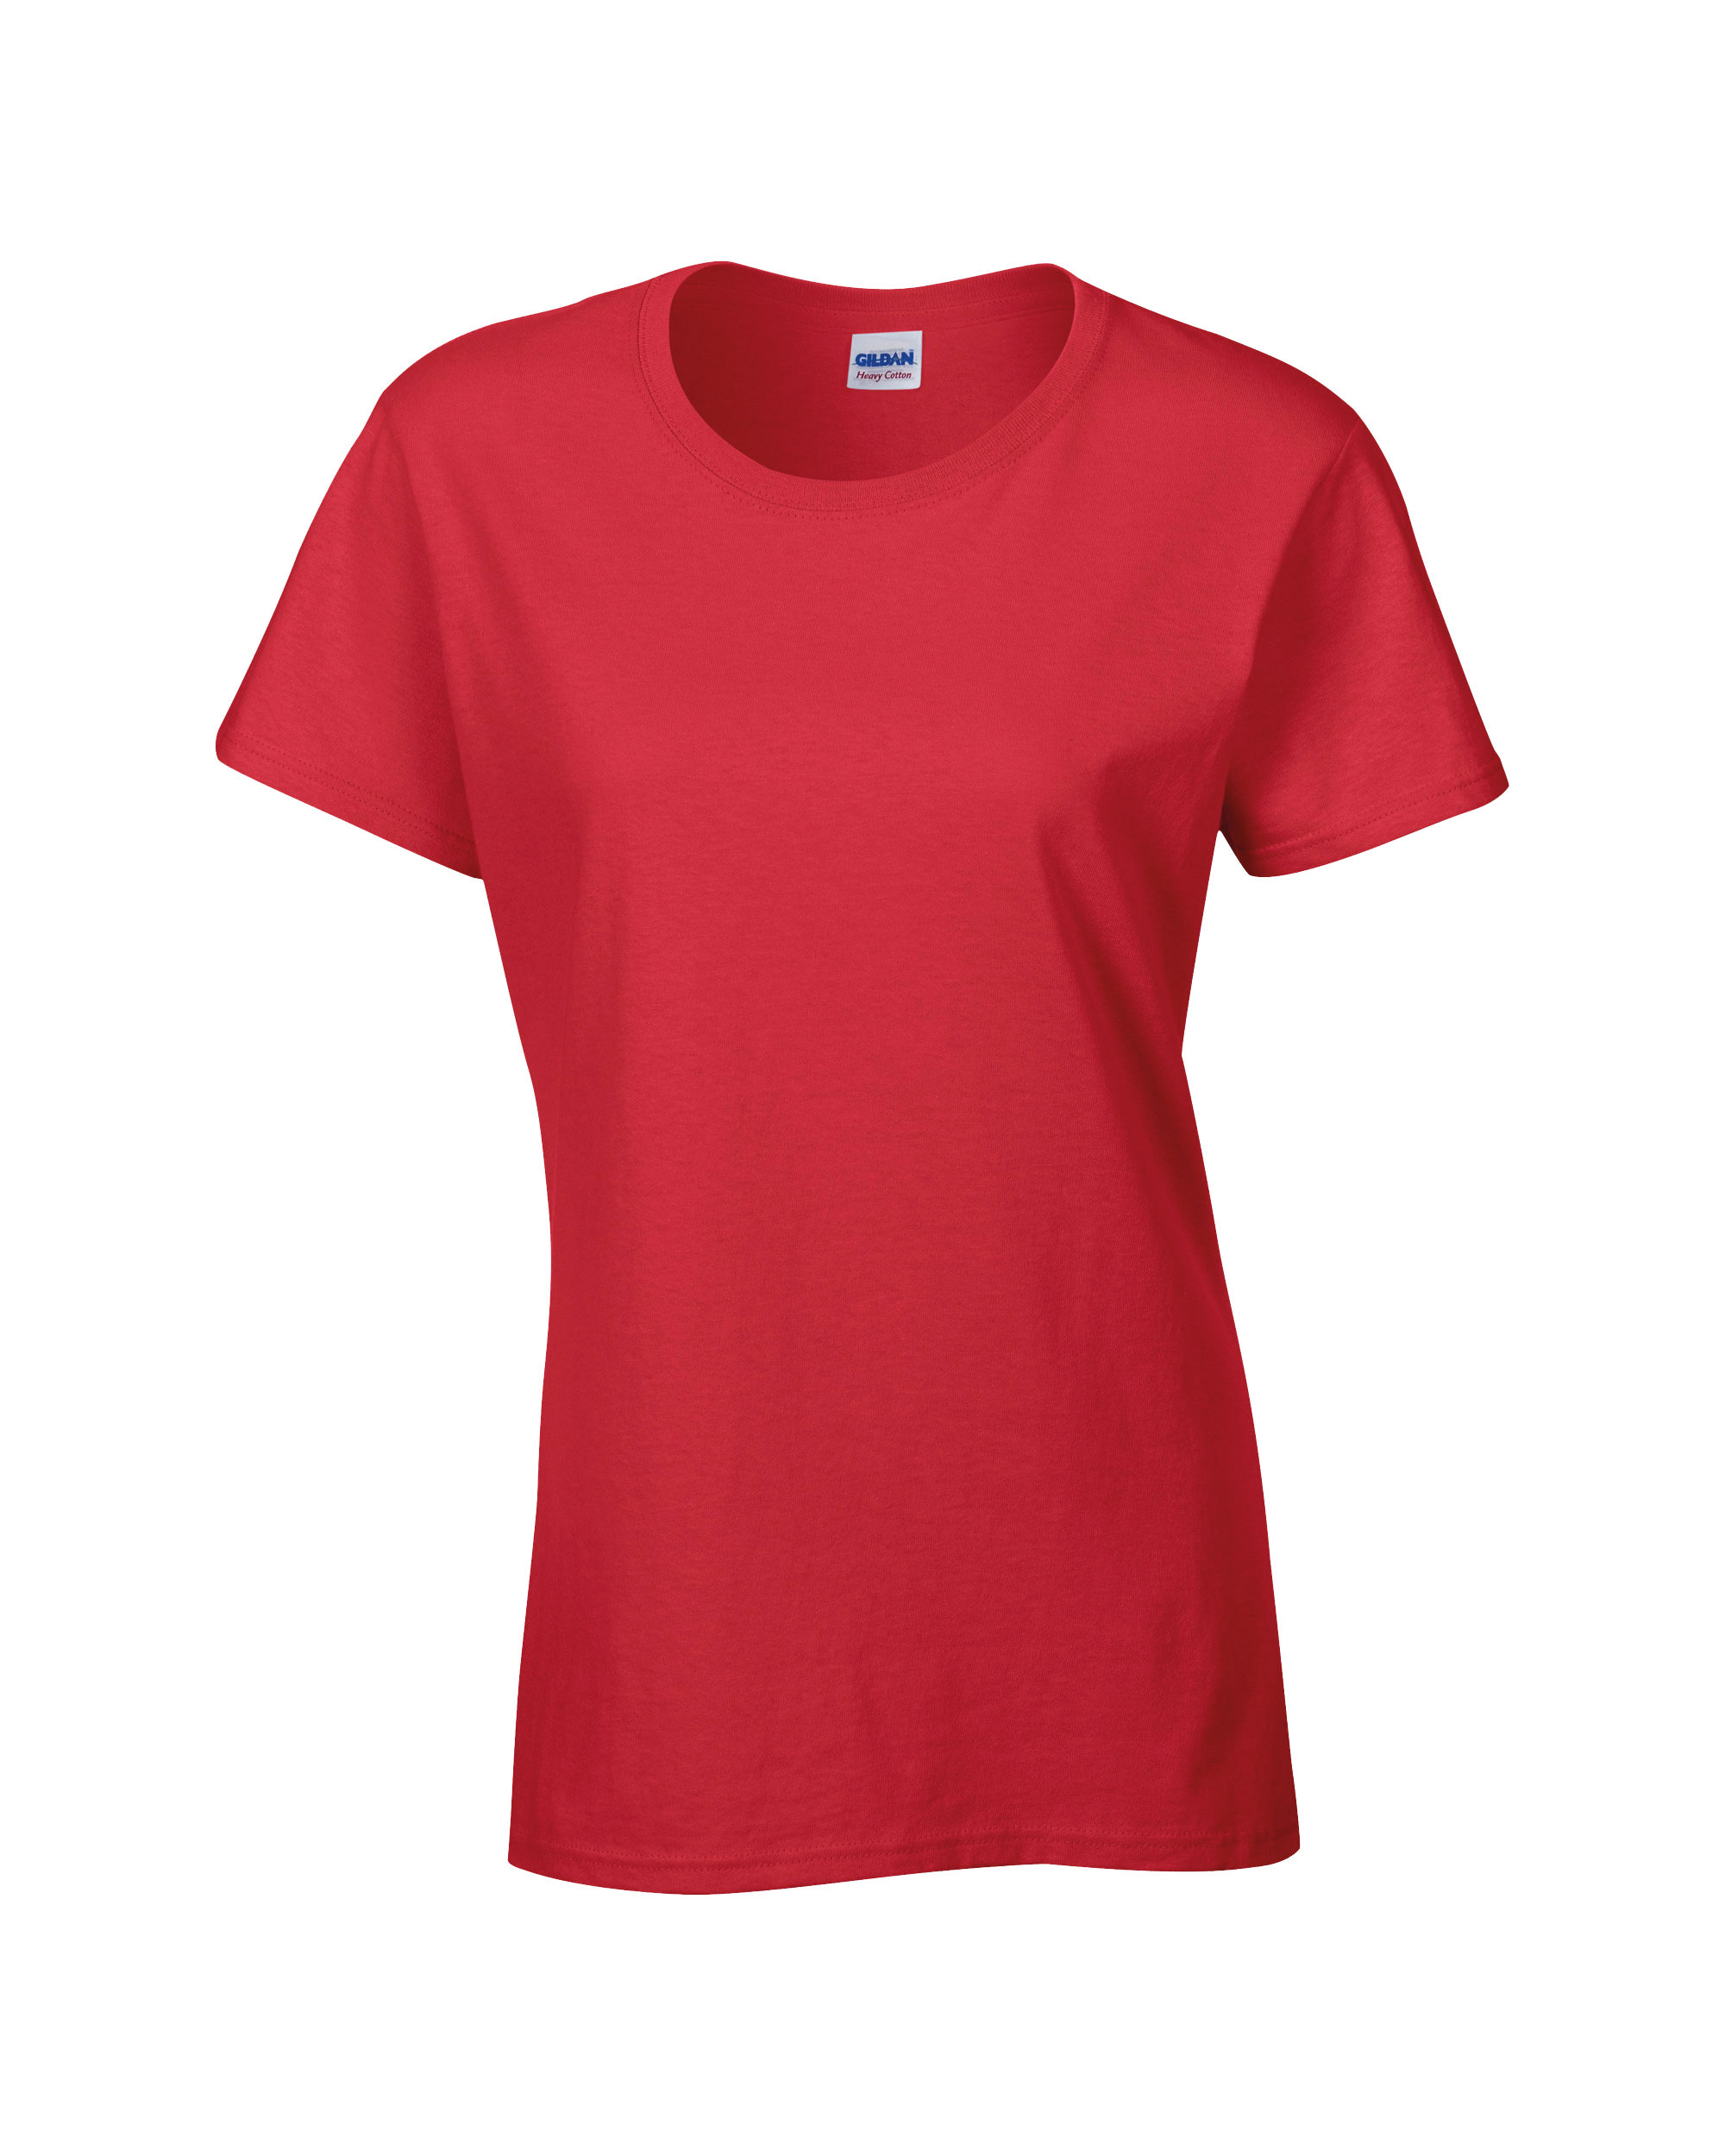 ax-httpswebsystems.s3.amazonaws.comtmp_for_downloadwomens-heavy-cotton-red.jpg